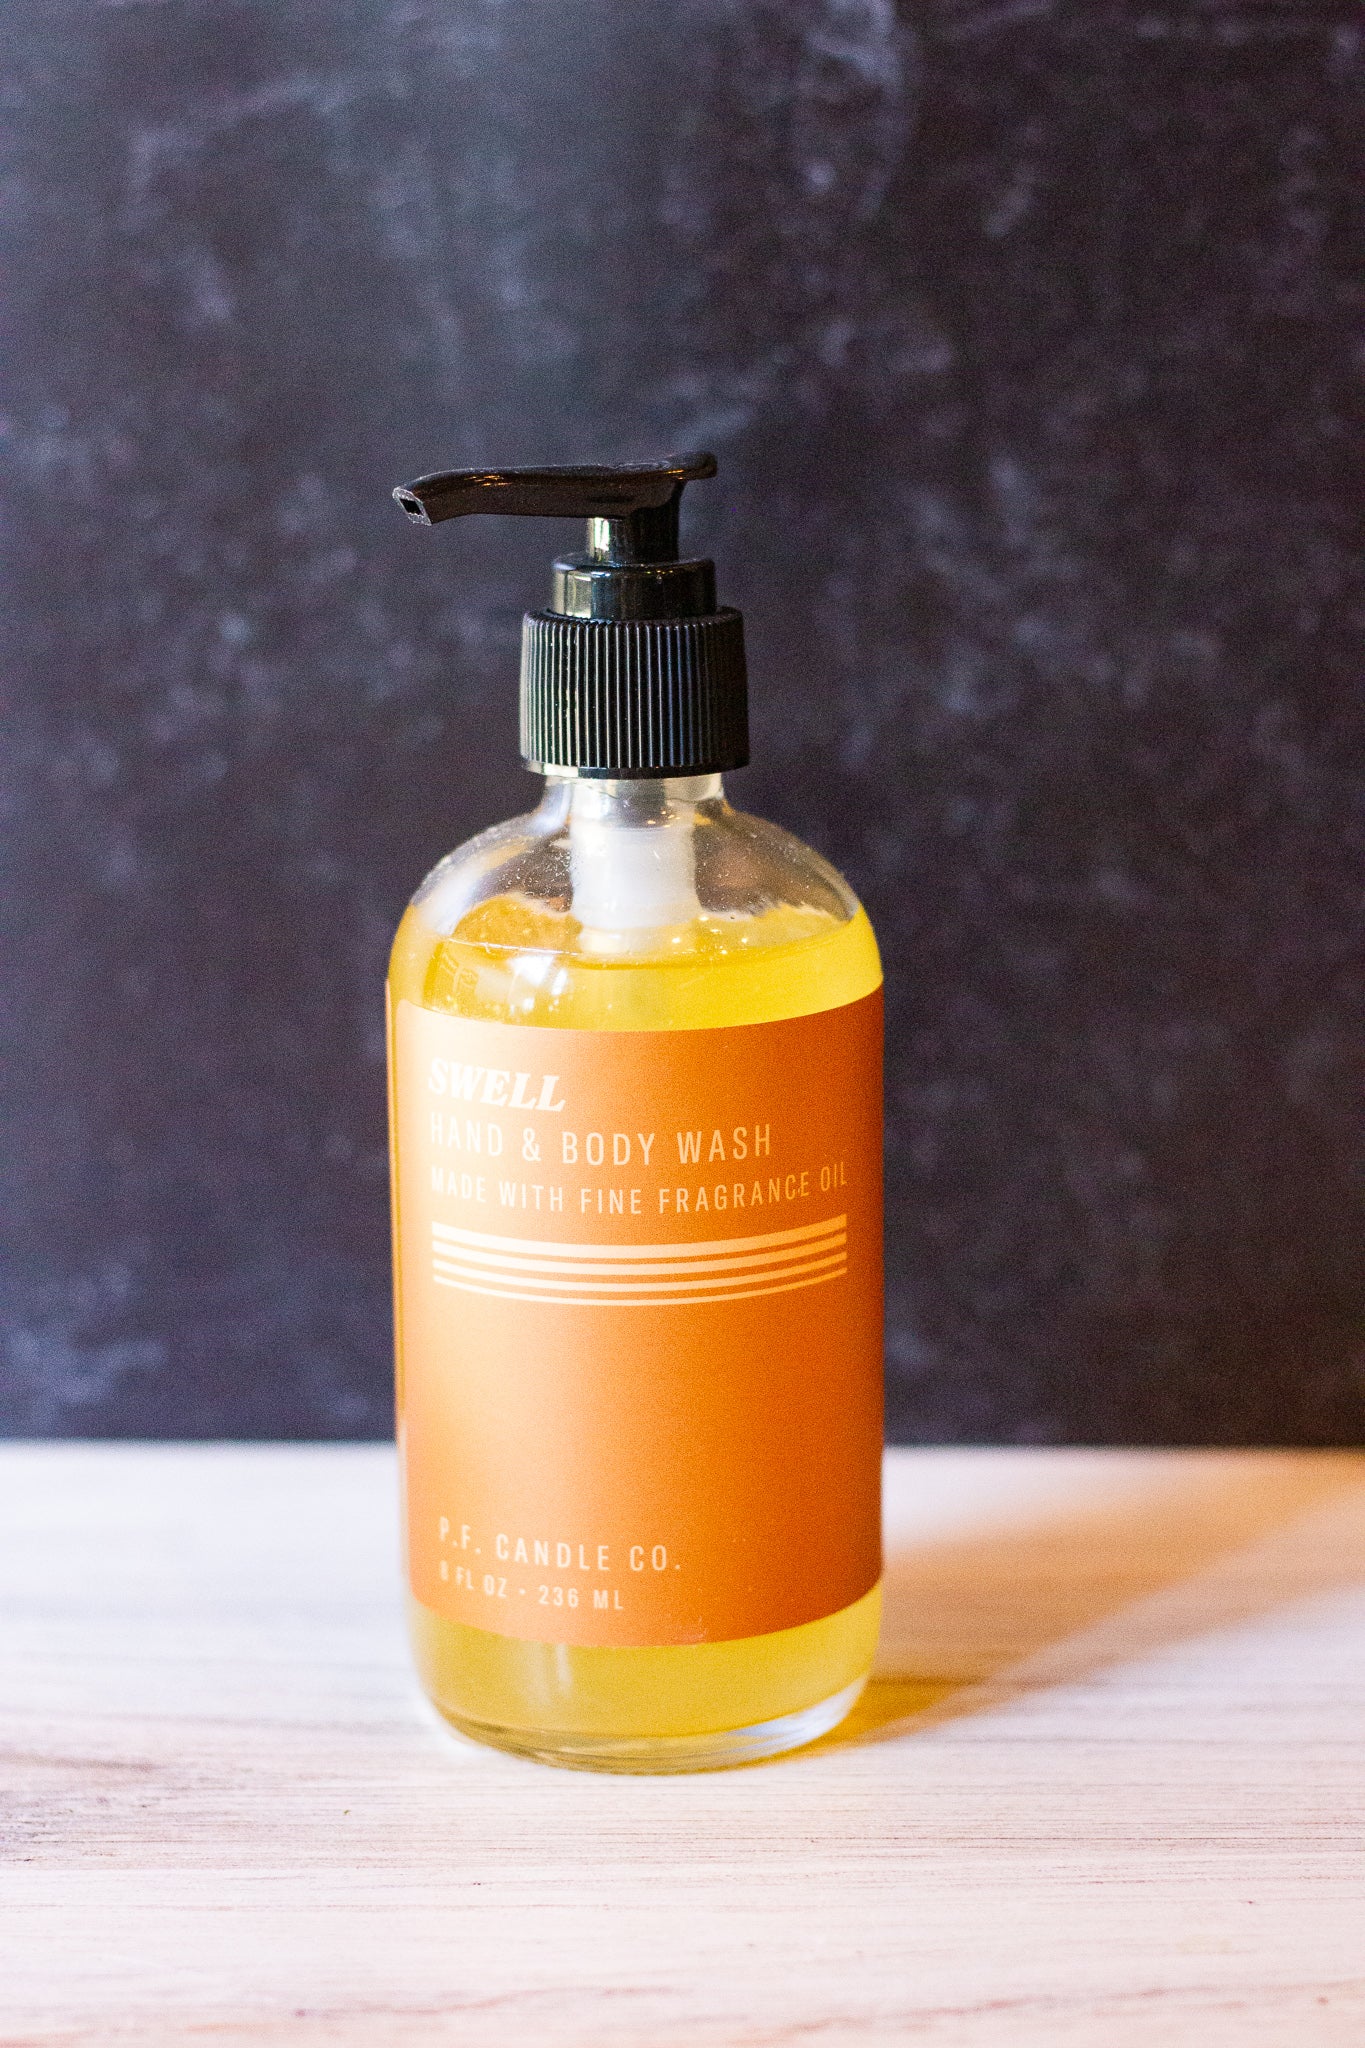 P.F. Candle Co. Swell Hand & Body Wash